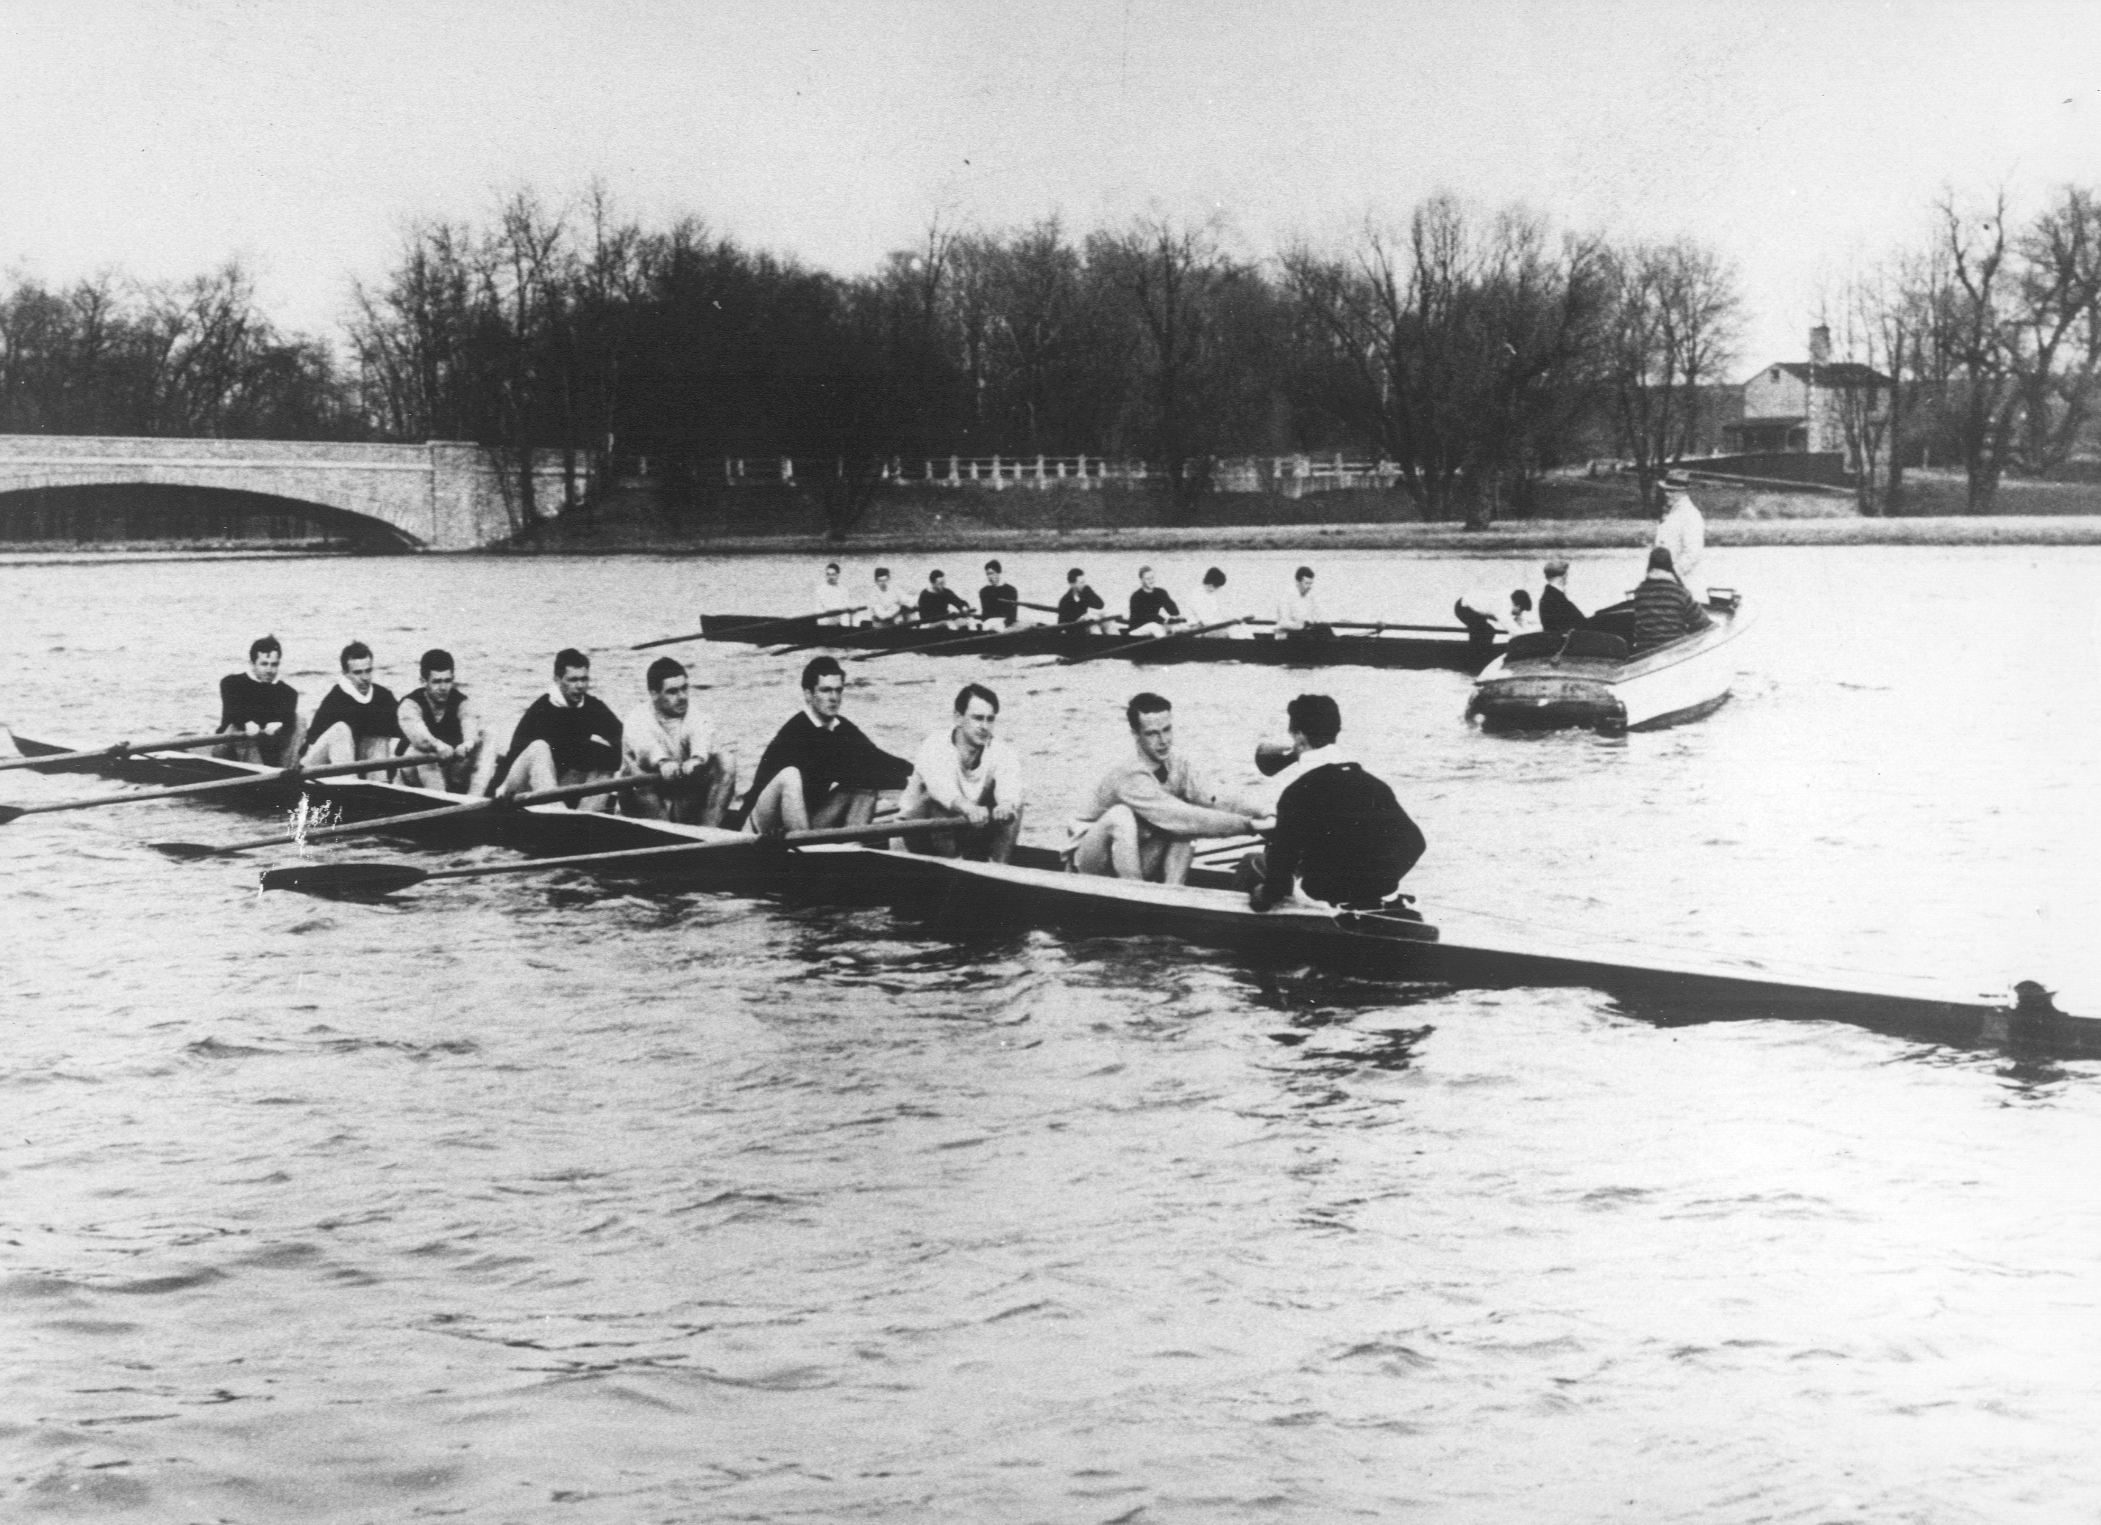 A group of people rowing a boat in a body of water